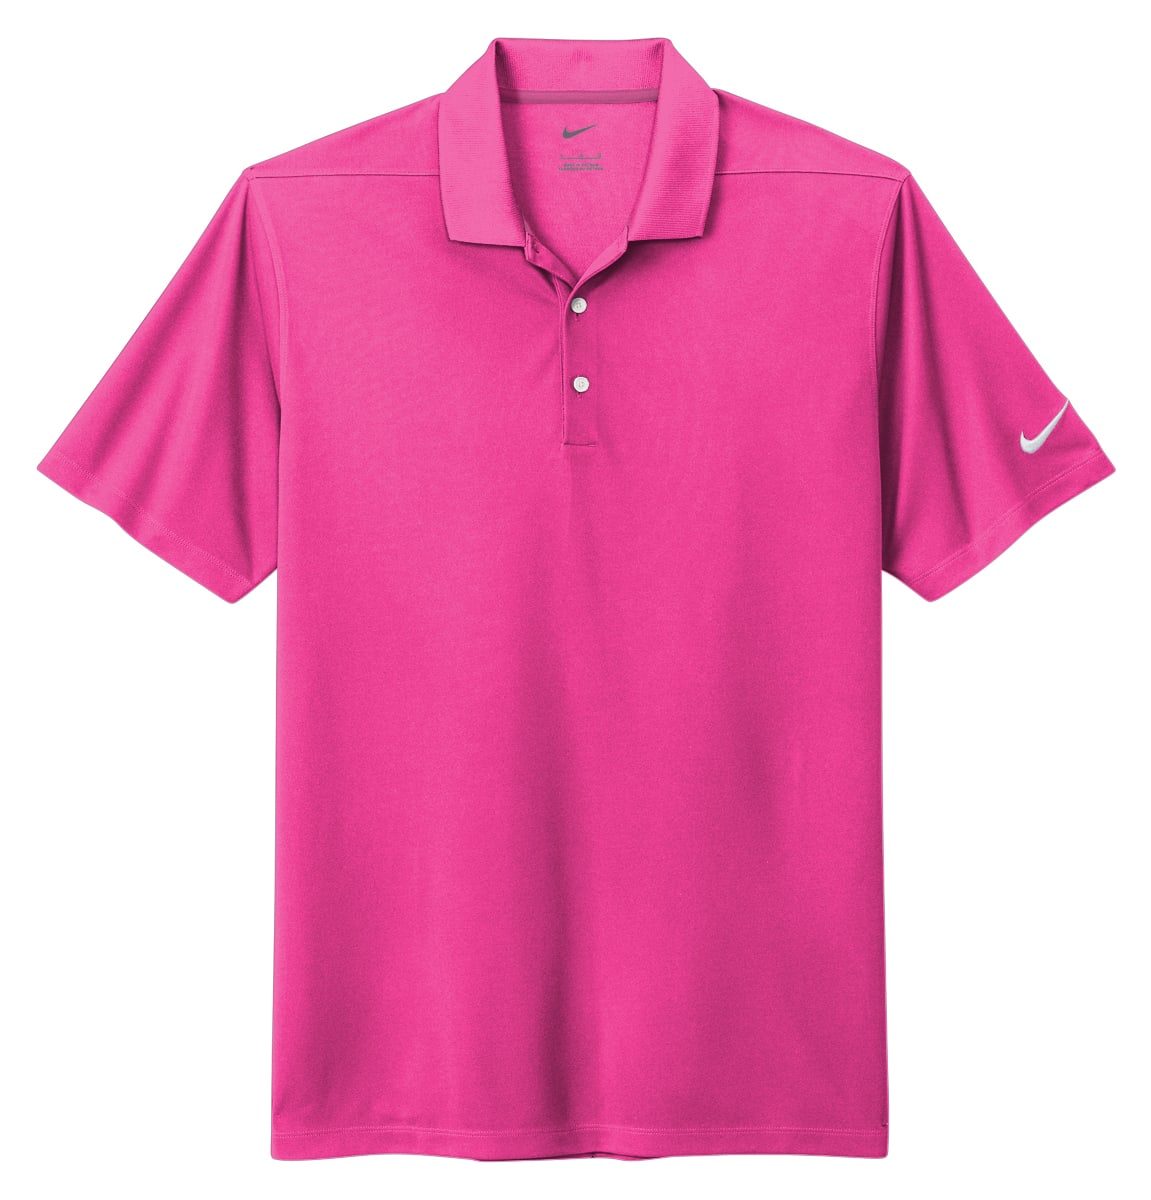 Embroidered Nike Dri-FIT Polos (10 for $45 each)